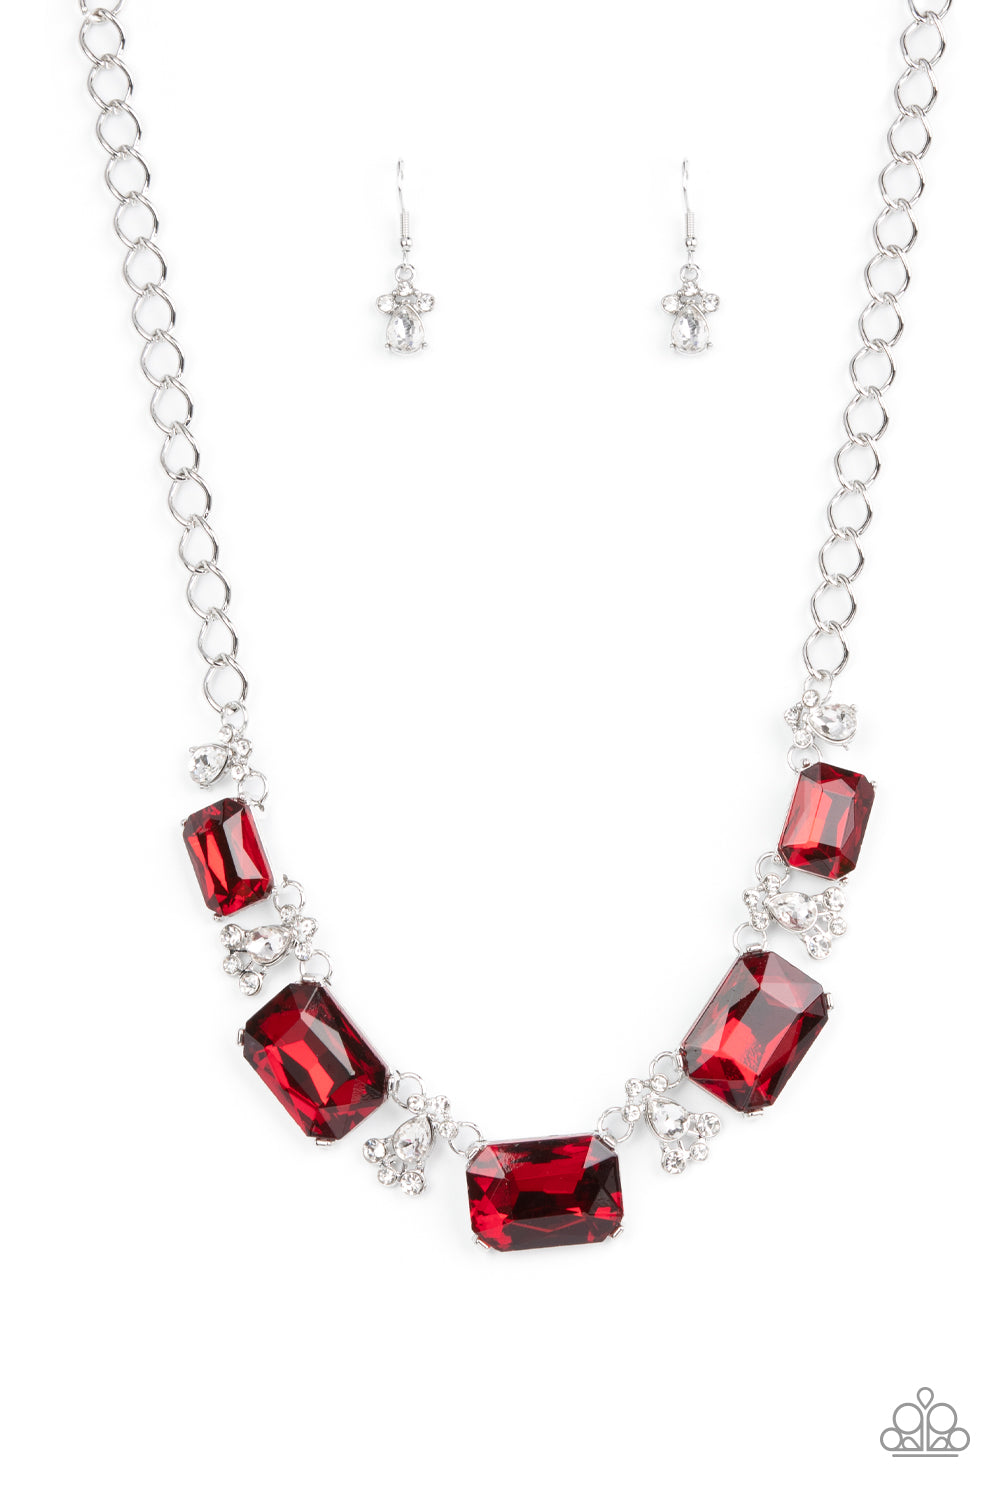 Flawlessly Famous - Red necklace B083